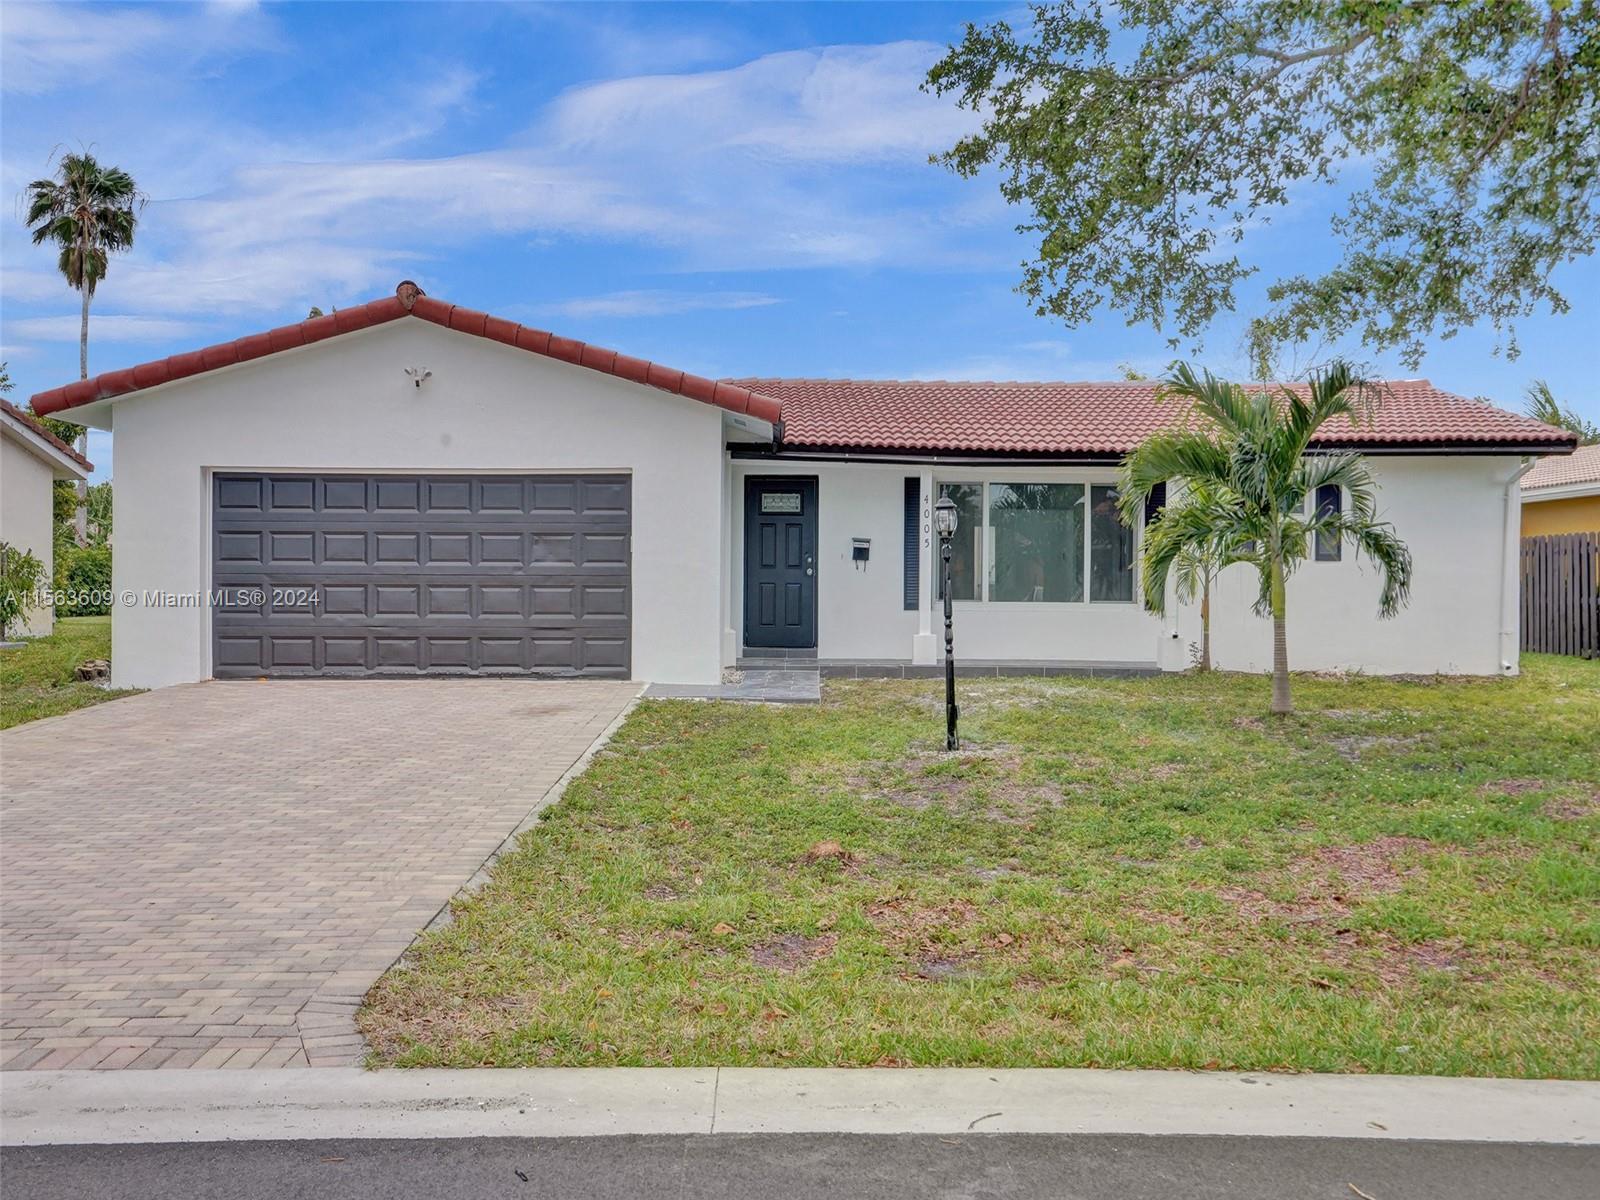 Photo of 4005 NW 76th Ave in Coral Springs, FL